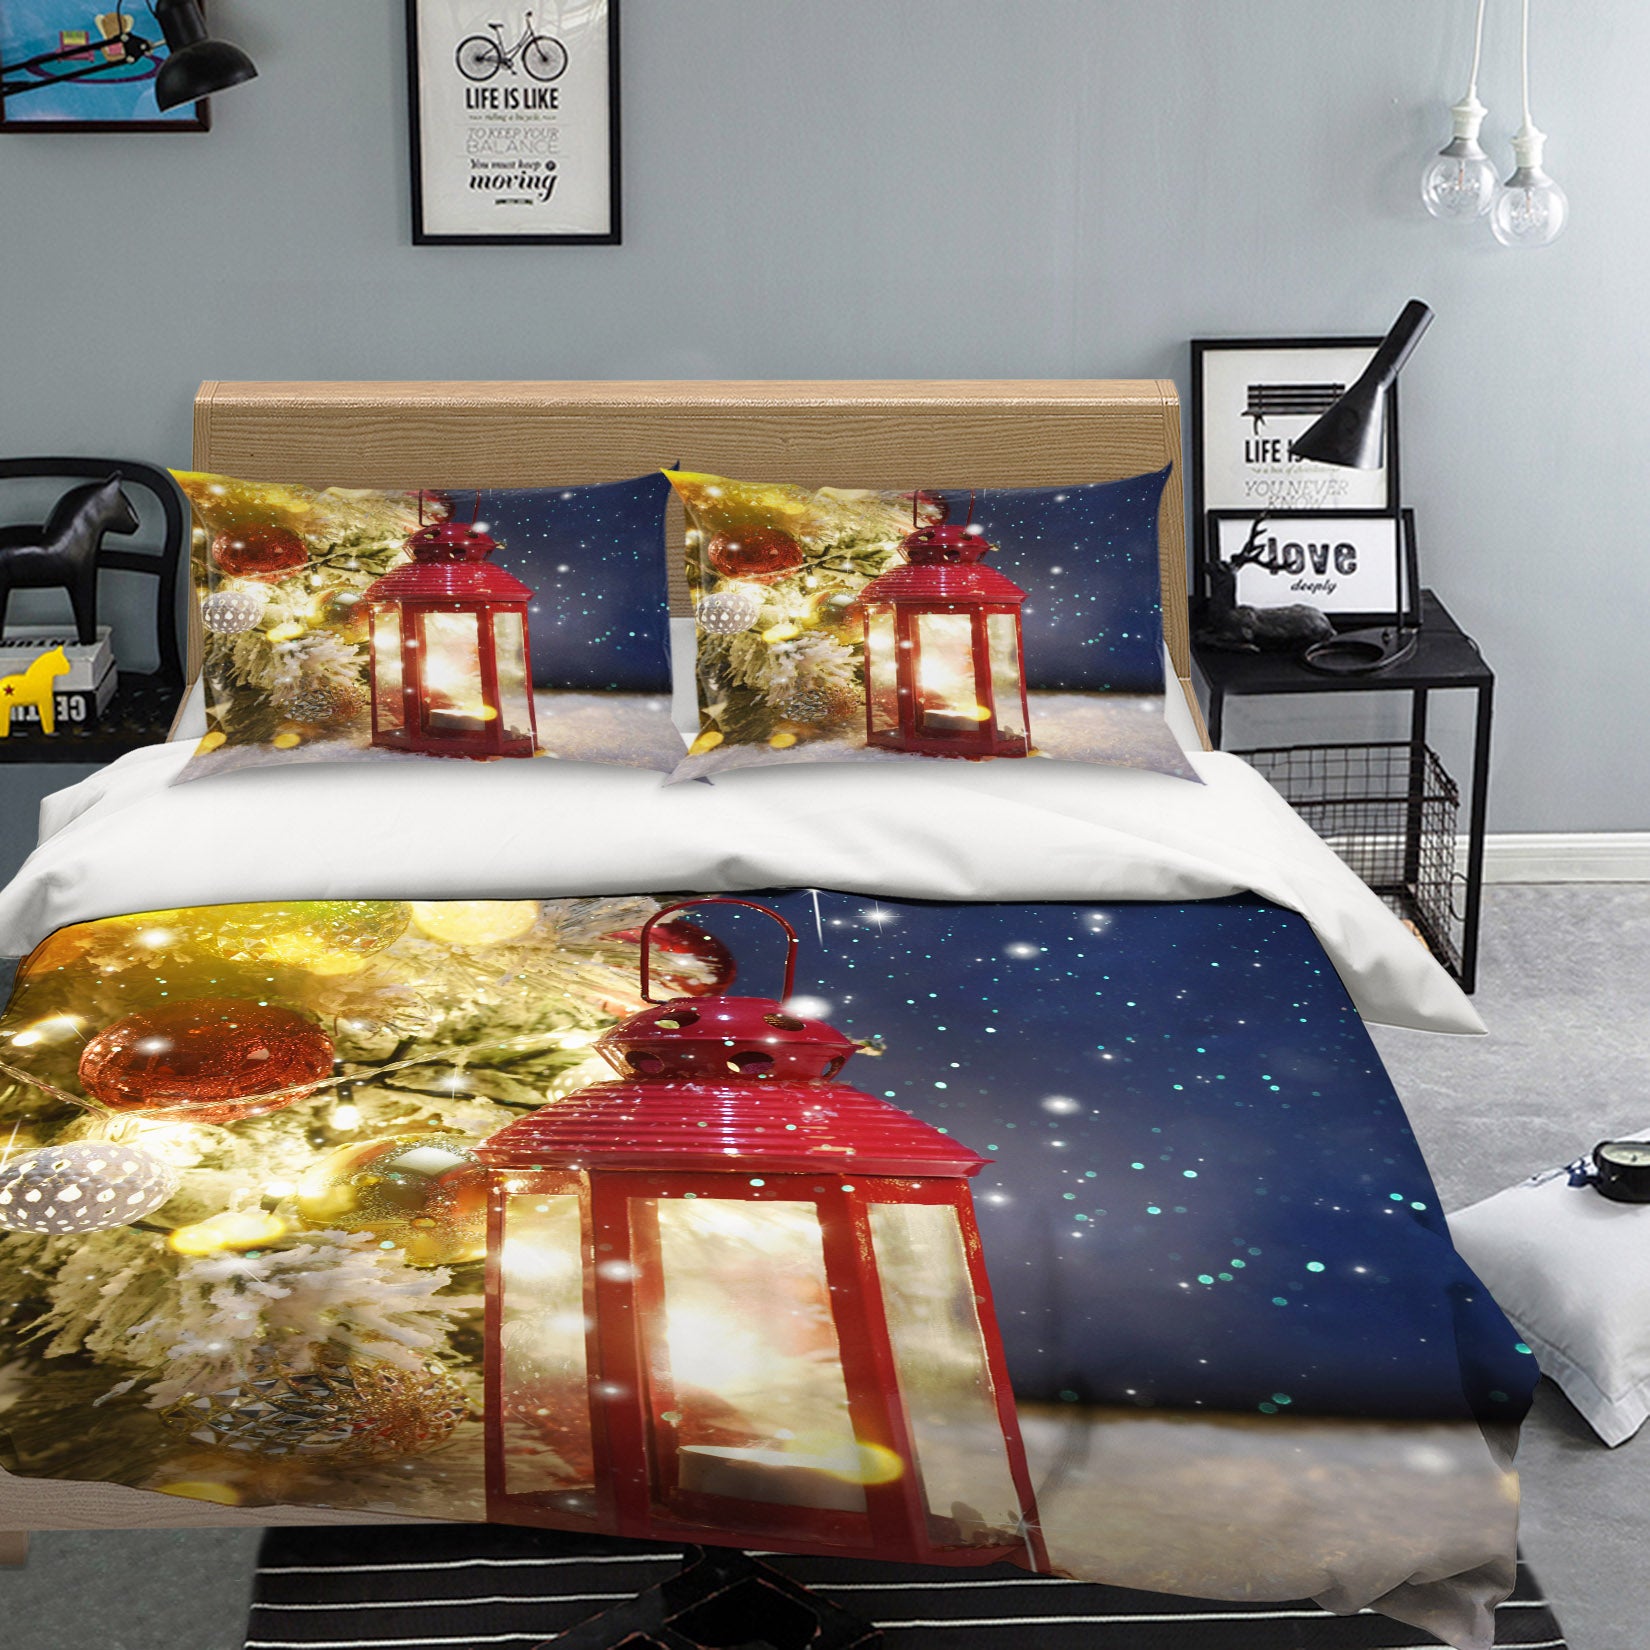 3D Candle Light Snowing 53005 Christmas Quilt Duvet Cover Xmas Bed Pillowcases